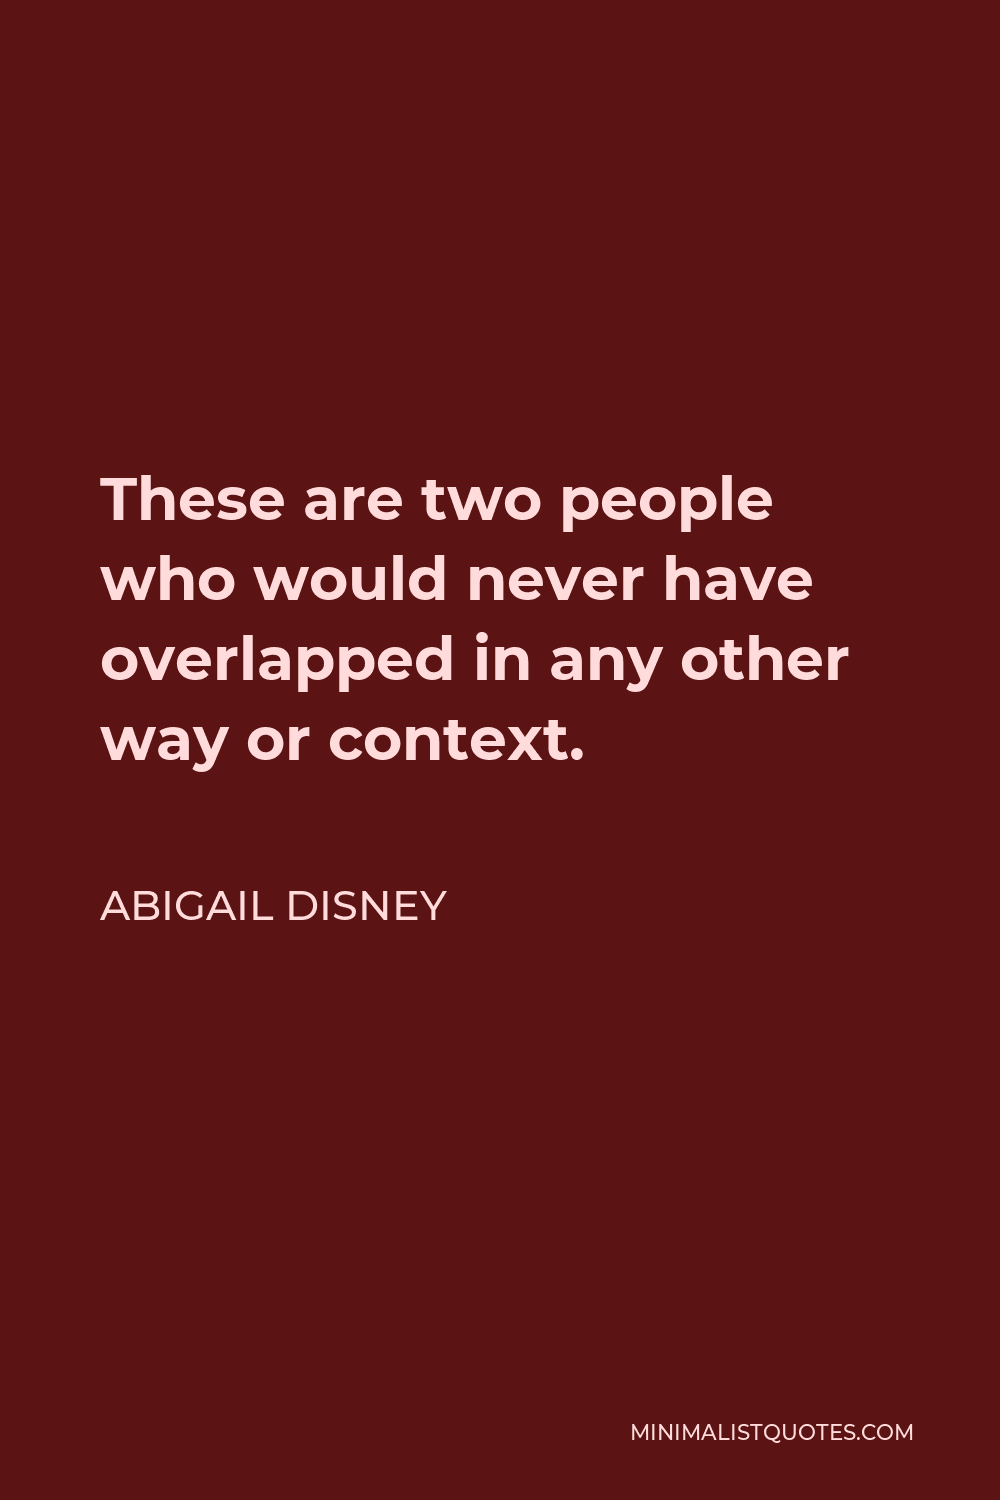 Abigail Disney Quote - These are two people who would never have overlapped in any other way or context.